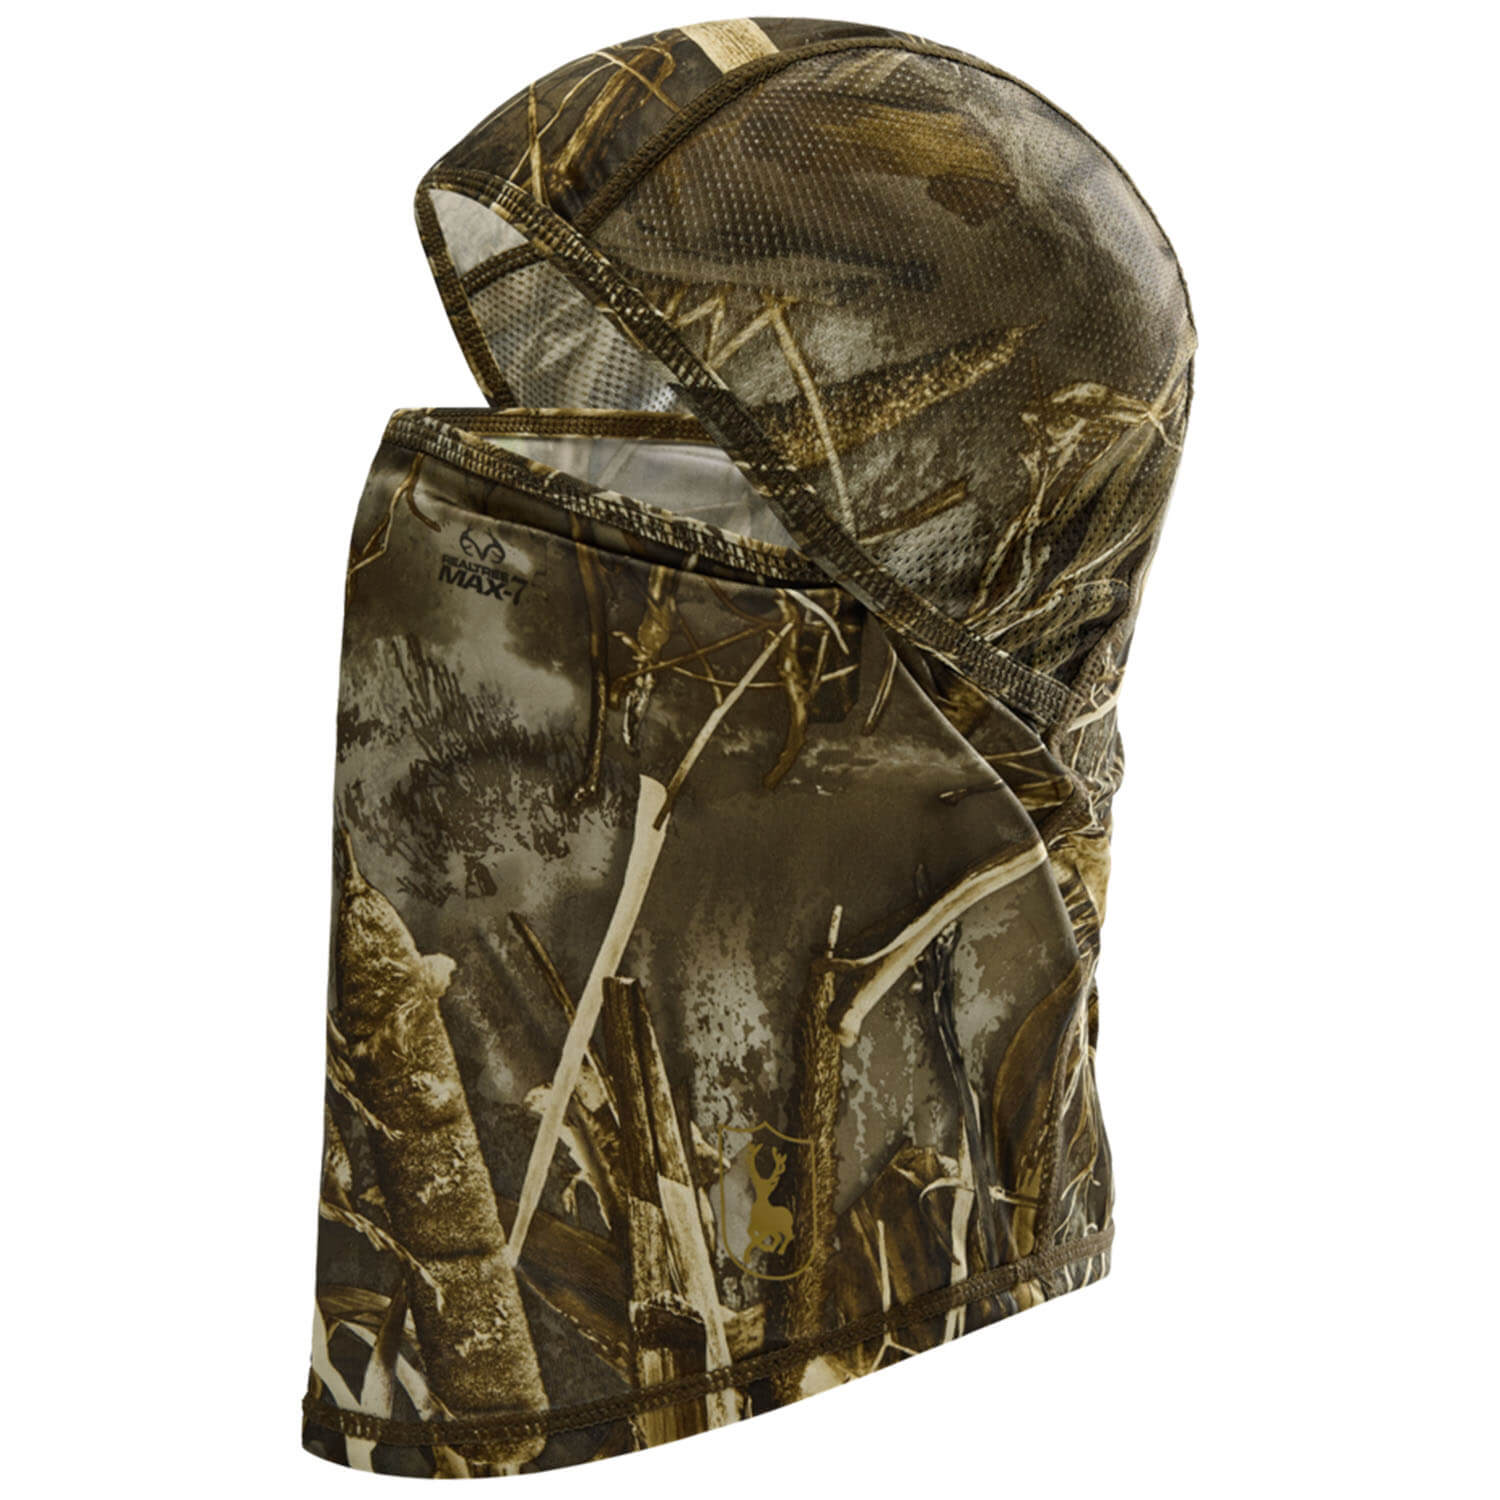 Deerhunter Facemask Full Face (realtree MAX-7) - Camouflage Masks